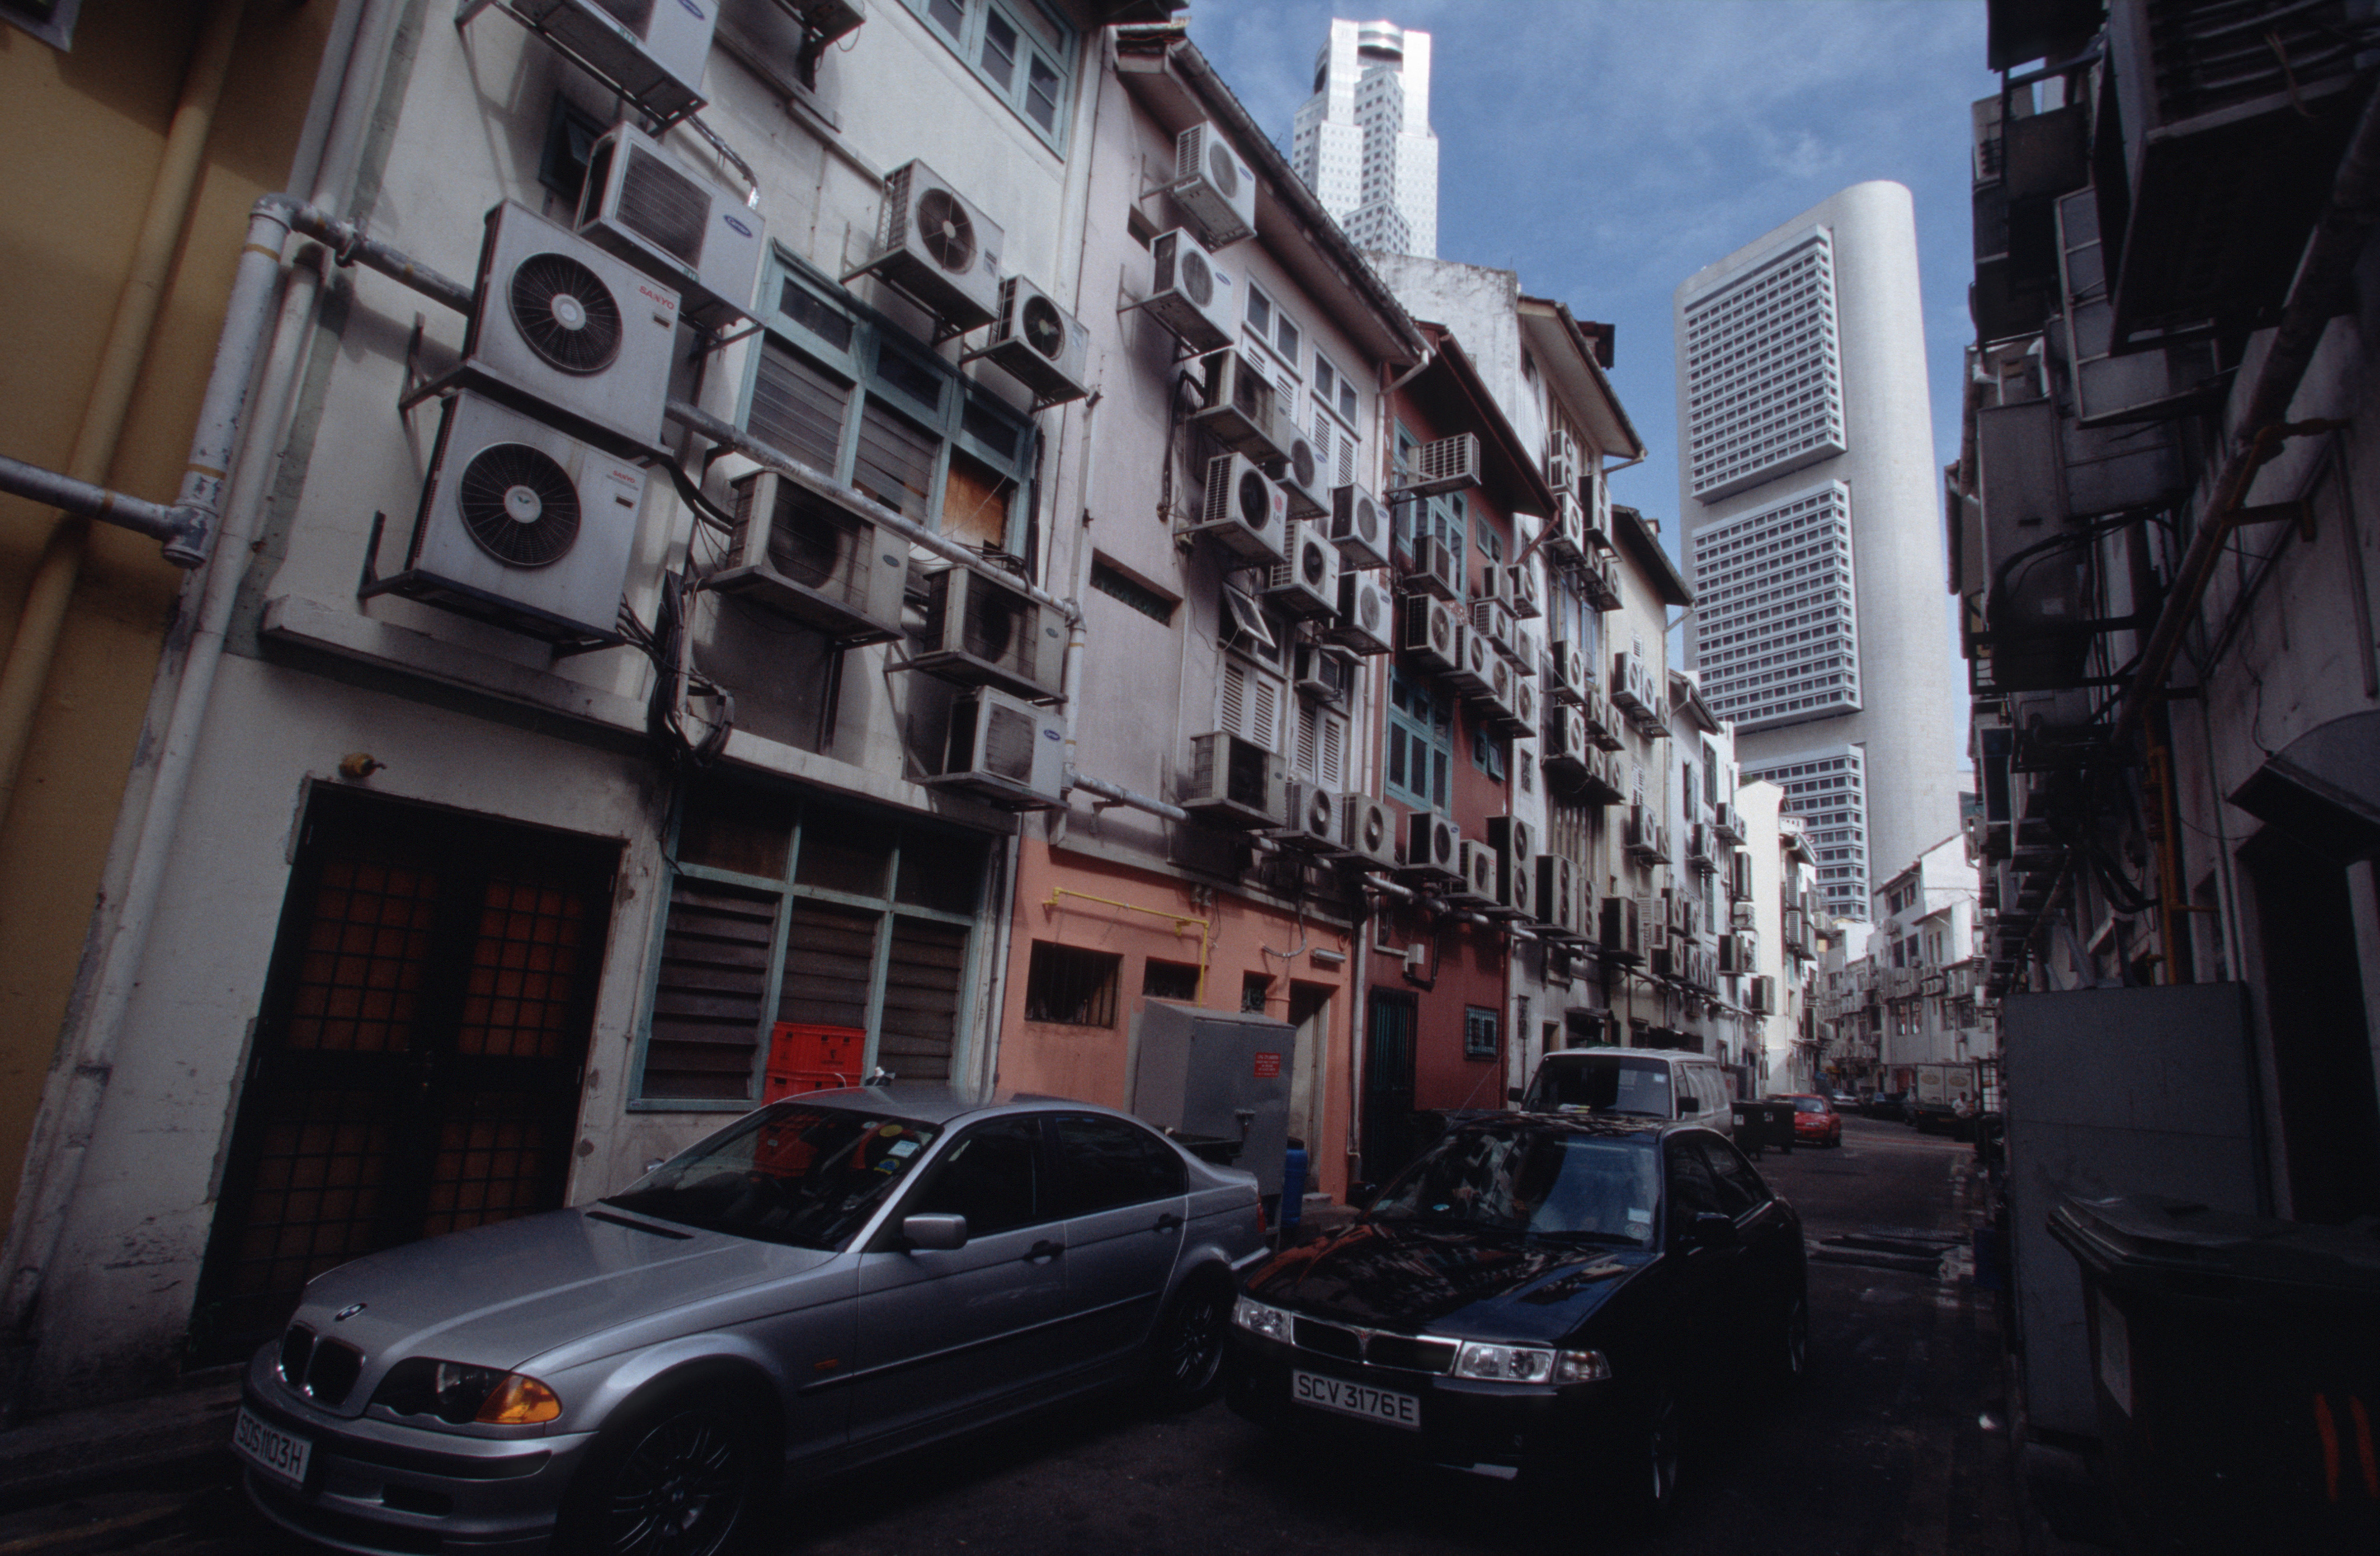 A mass of air conditioning units hang off the back side of a row of buildings that open onto the fashionable Boat Quay area. In Singapore's tropical climate, air conditioning has become a must.